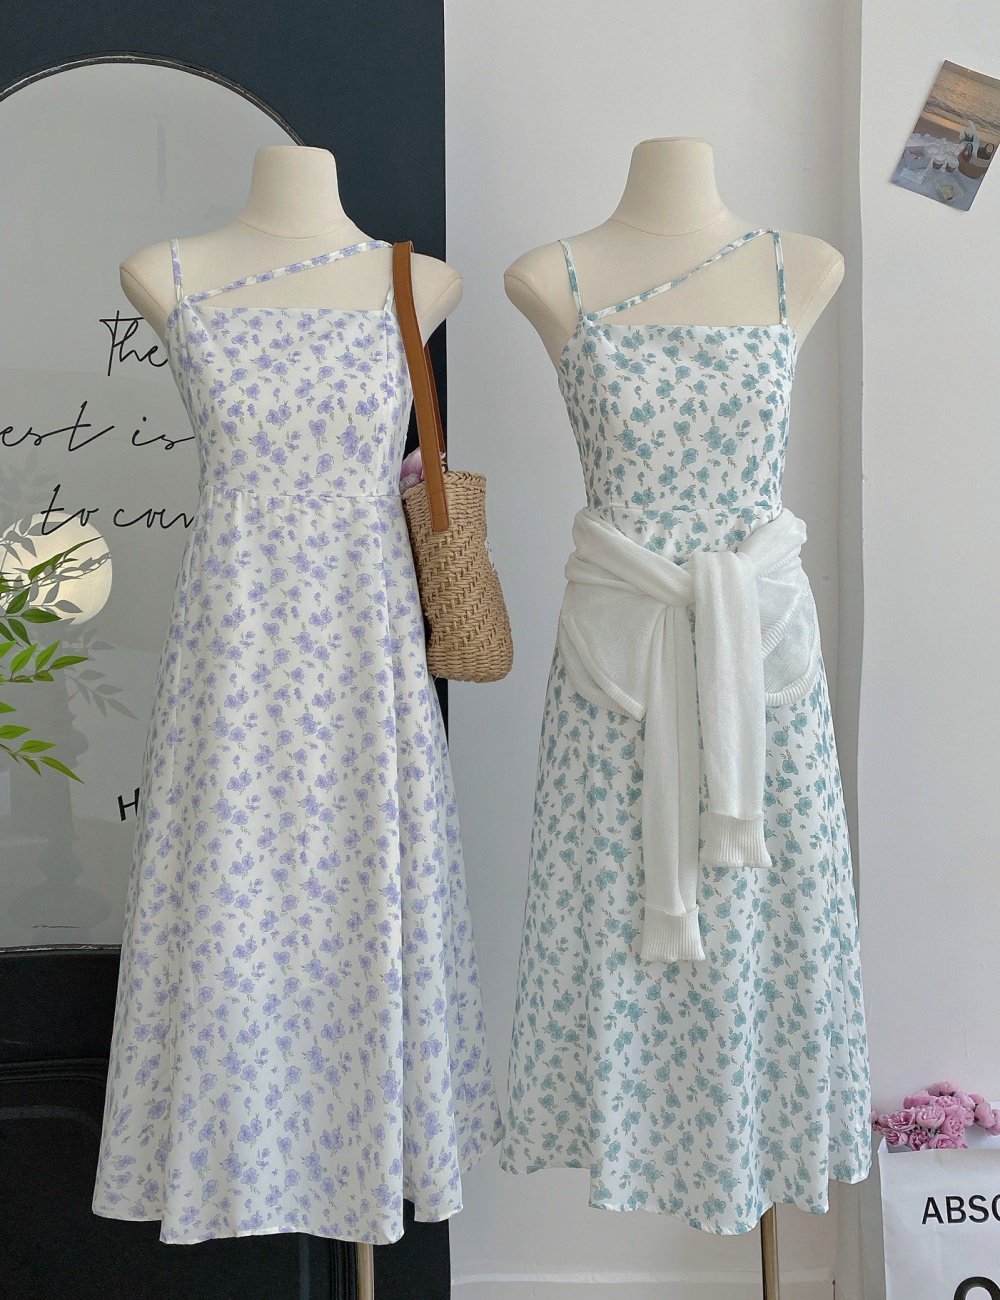 Pinched waist floral strap dress vacation fresh dress for women